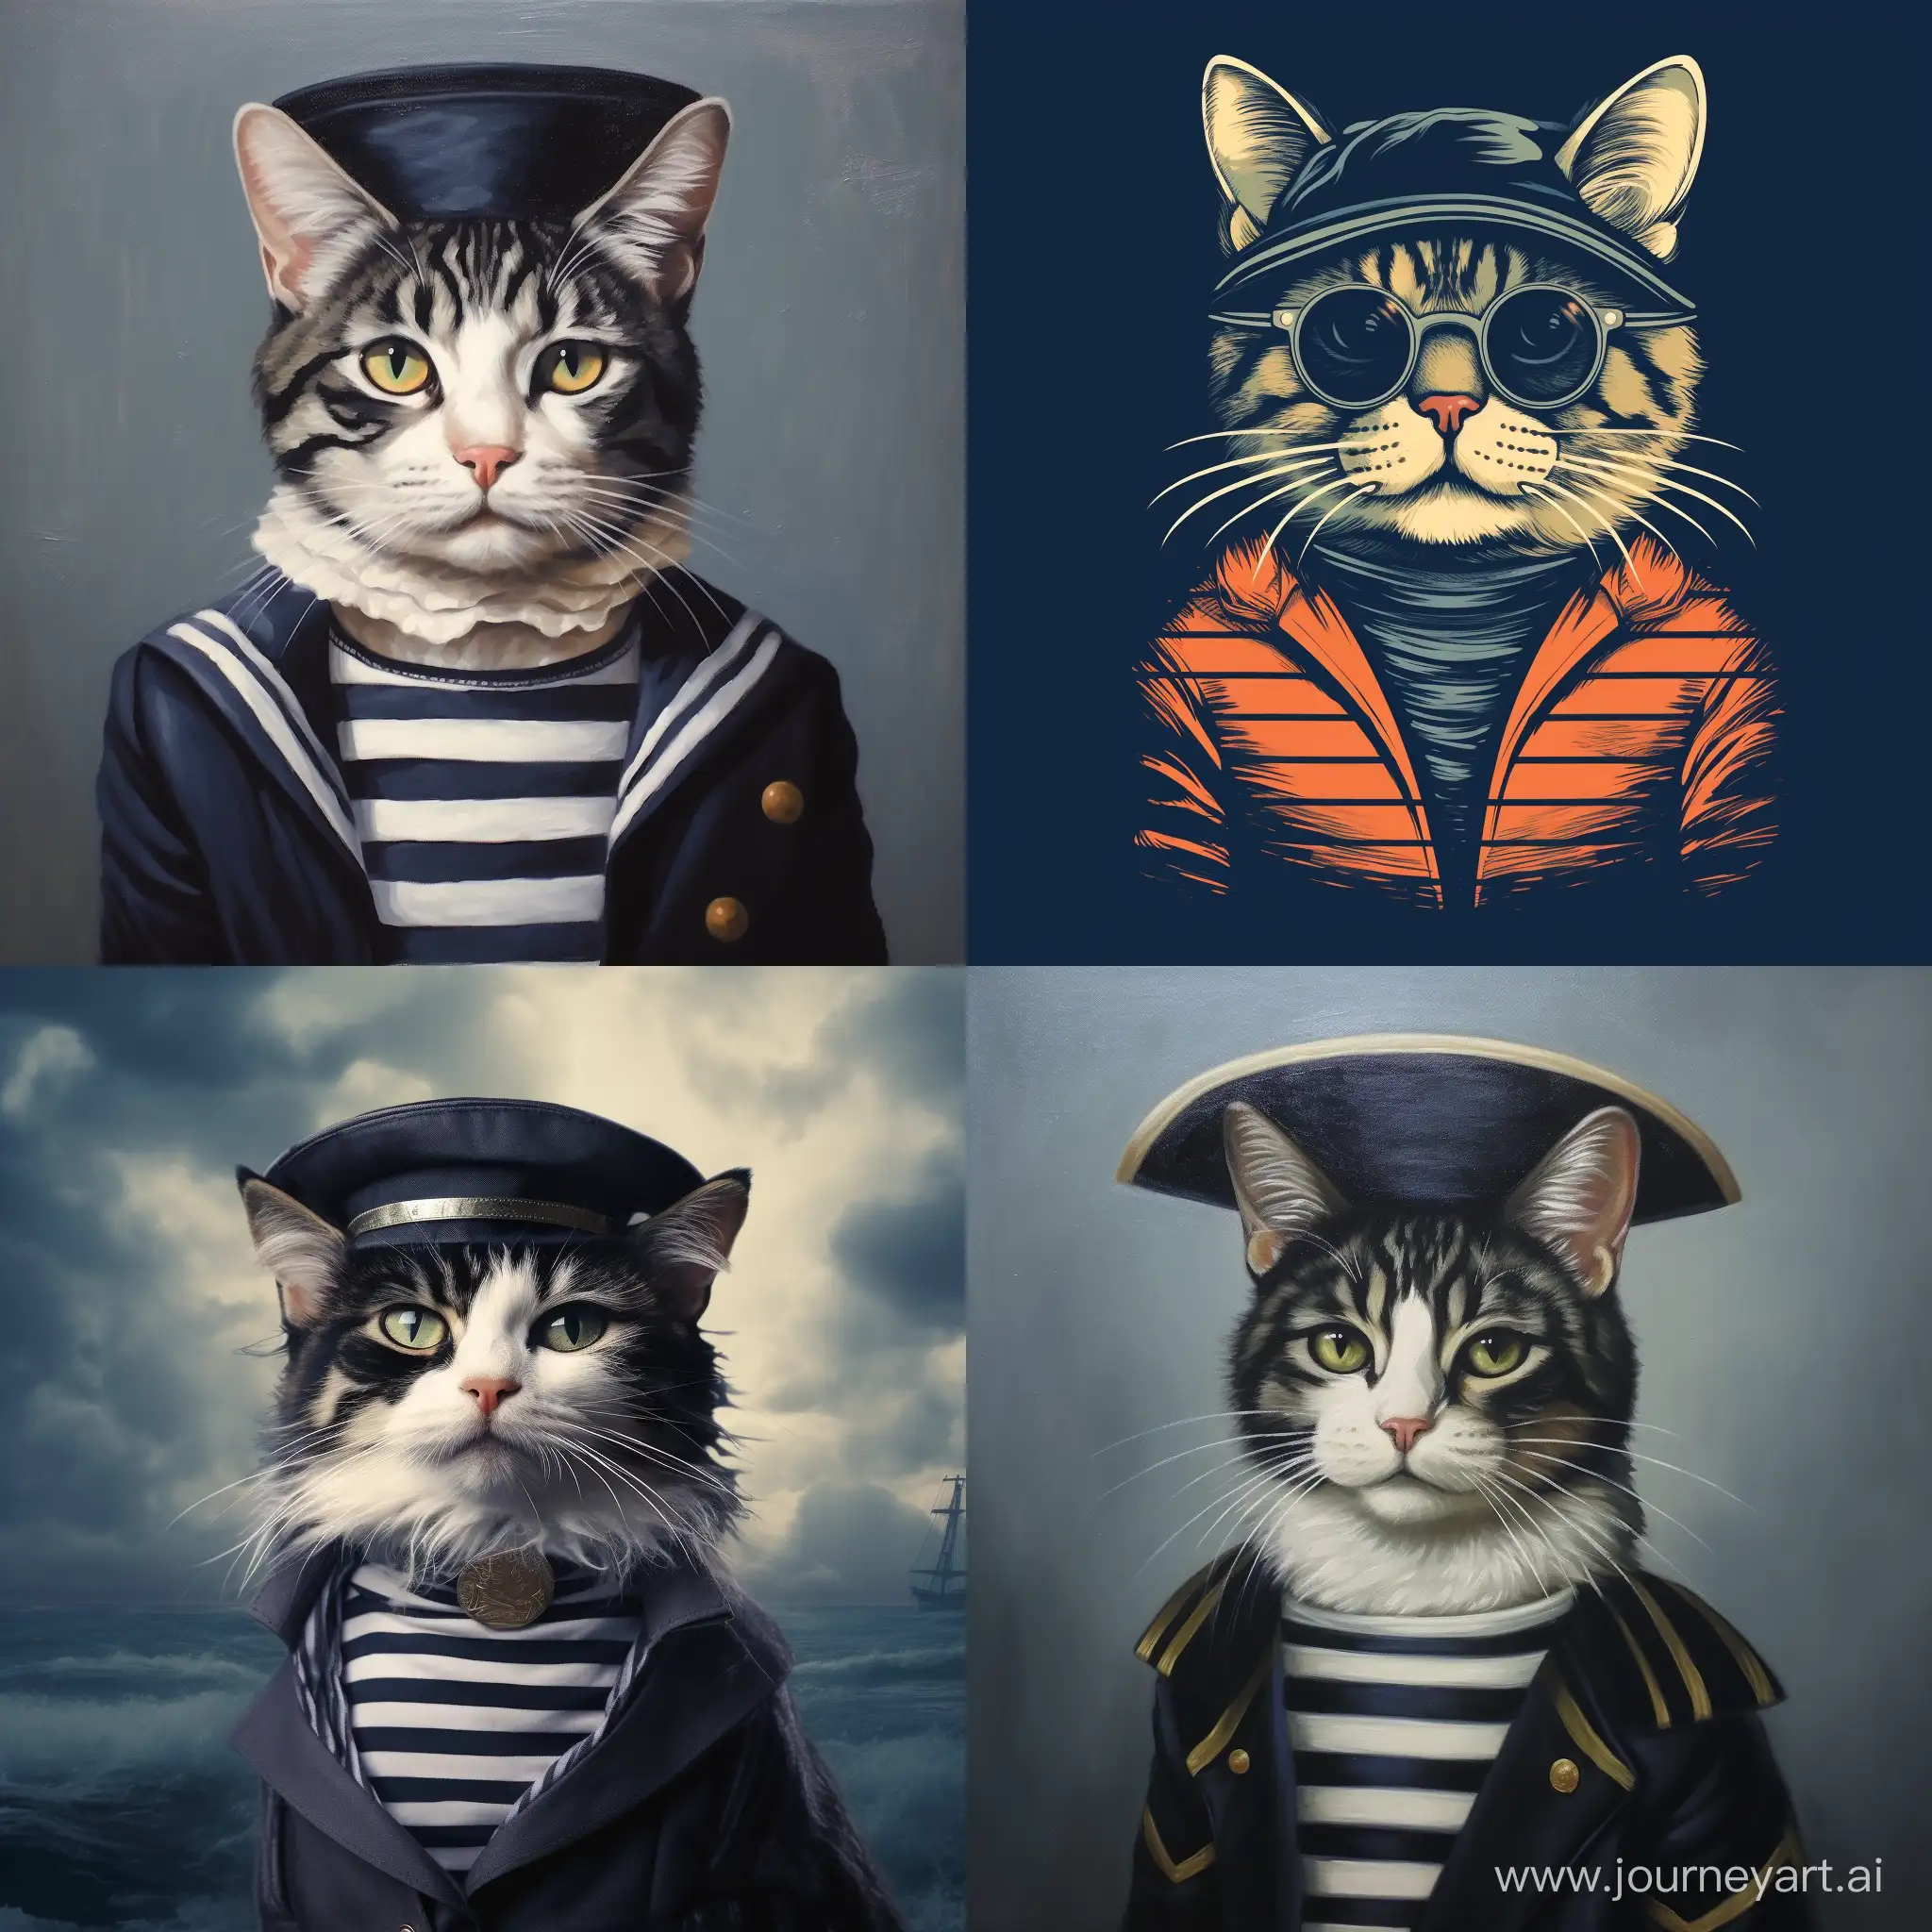 Sailor-Cat-with-Eye-Patch-in-Striped-Shirt